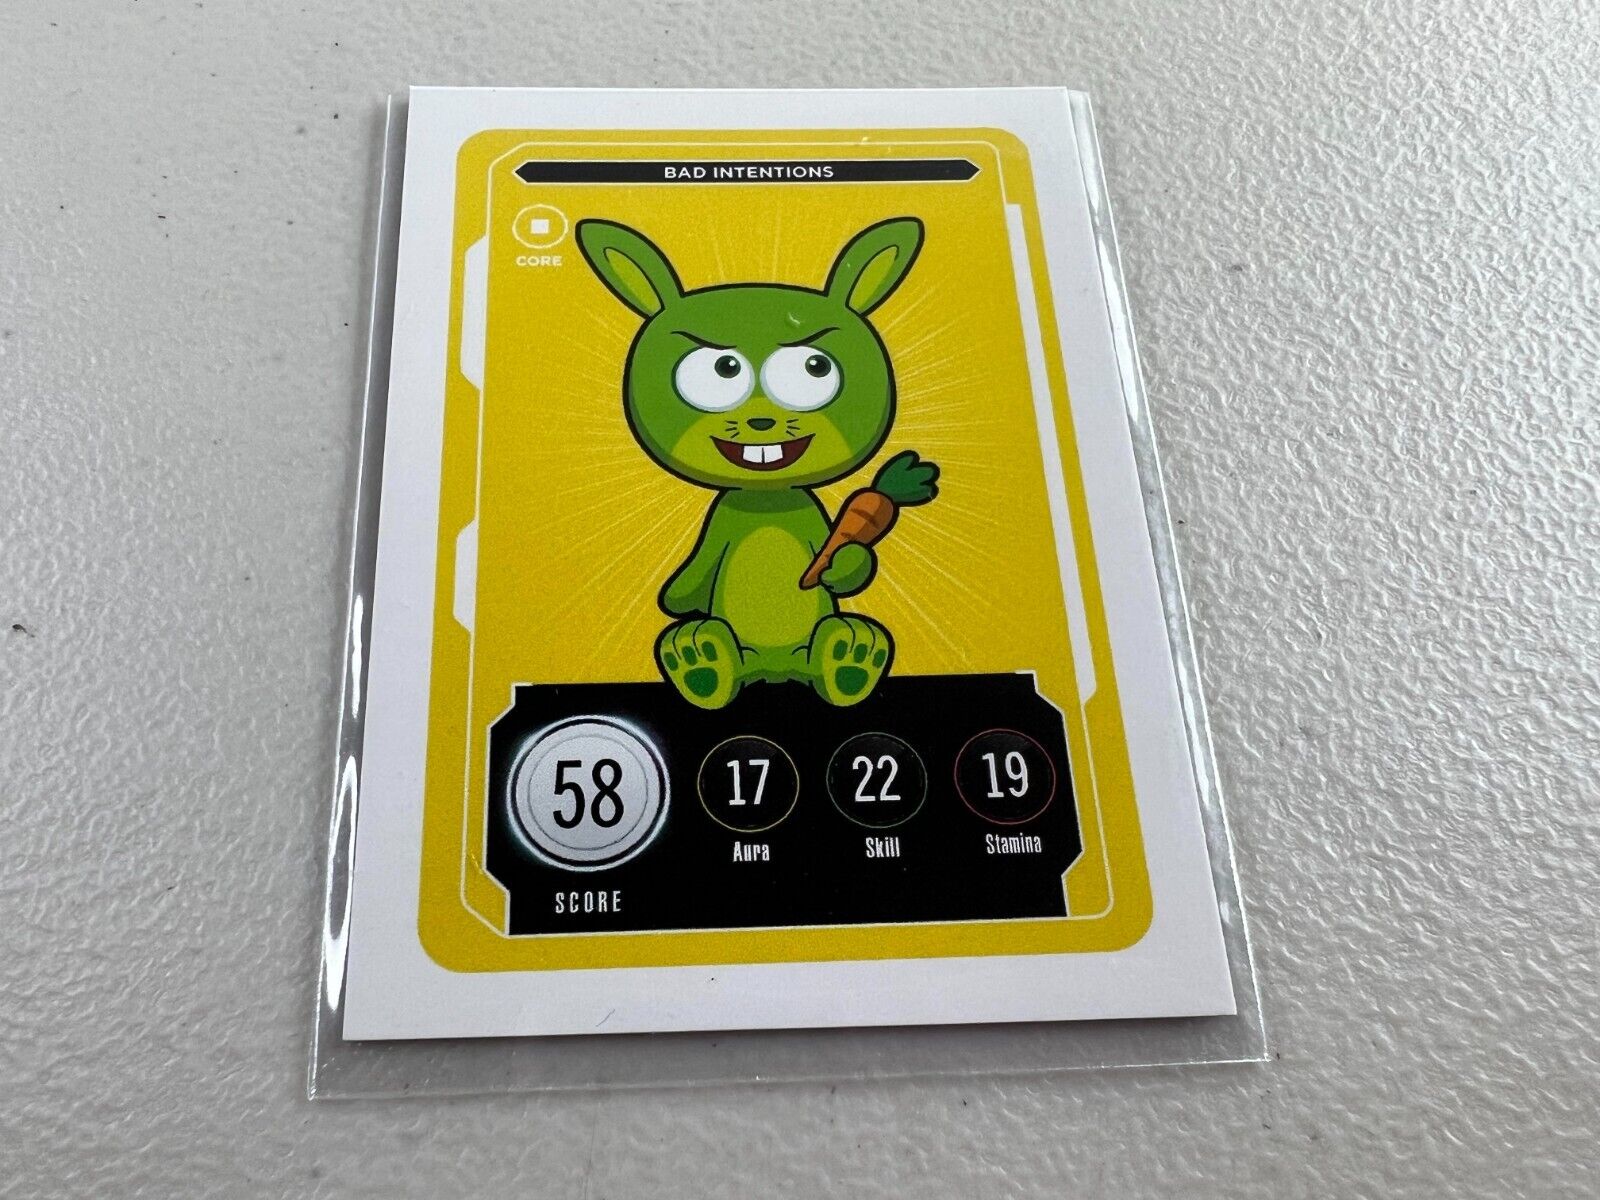 VeeFriends Bad Intentions Series 2 Core Card Compete and Collect Gary Vee